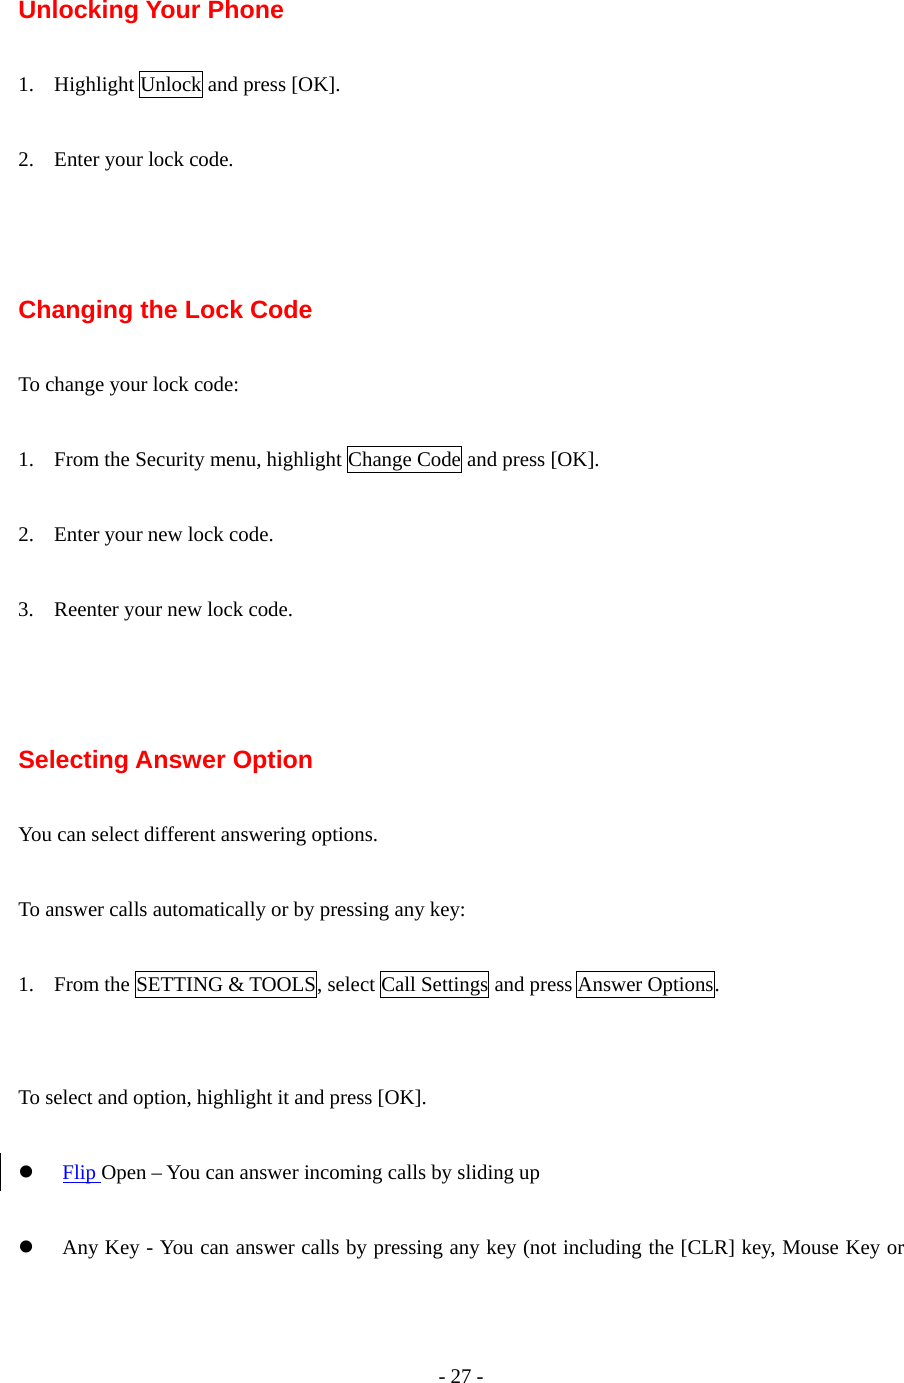 - 27 -   Unlocking Your Phone  1. Highlight Unlock and press [OK].  2. Enter your lock code.    Changing the Lock Code  To change your lock code:  1. From the Security menu, highlight Change Code and press [OK].  2. Enter your new lock code.  3. Reenter your new lock code.    Selecting Answer Option  You can select different answering options.  To answer calls automatically or by pressing any key:  1. From the SETTING &amp; TOOLS, select Call Settings and press Answer Options.   To select and option, highlight it and press [OK].  z Flip Open – You can answer incoming calls by sliding up  z Any Key - You can answer calls by pressing any key (not including the [CLR] key, Mouse Key or 